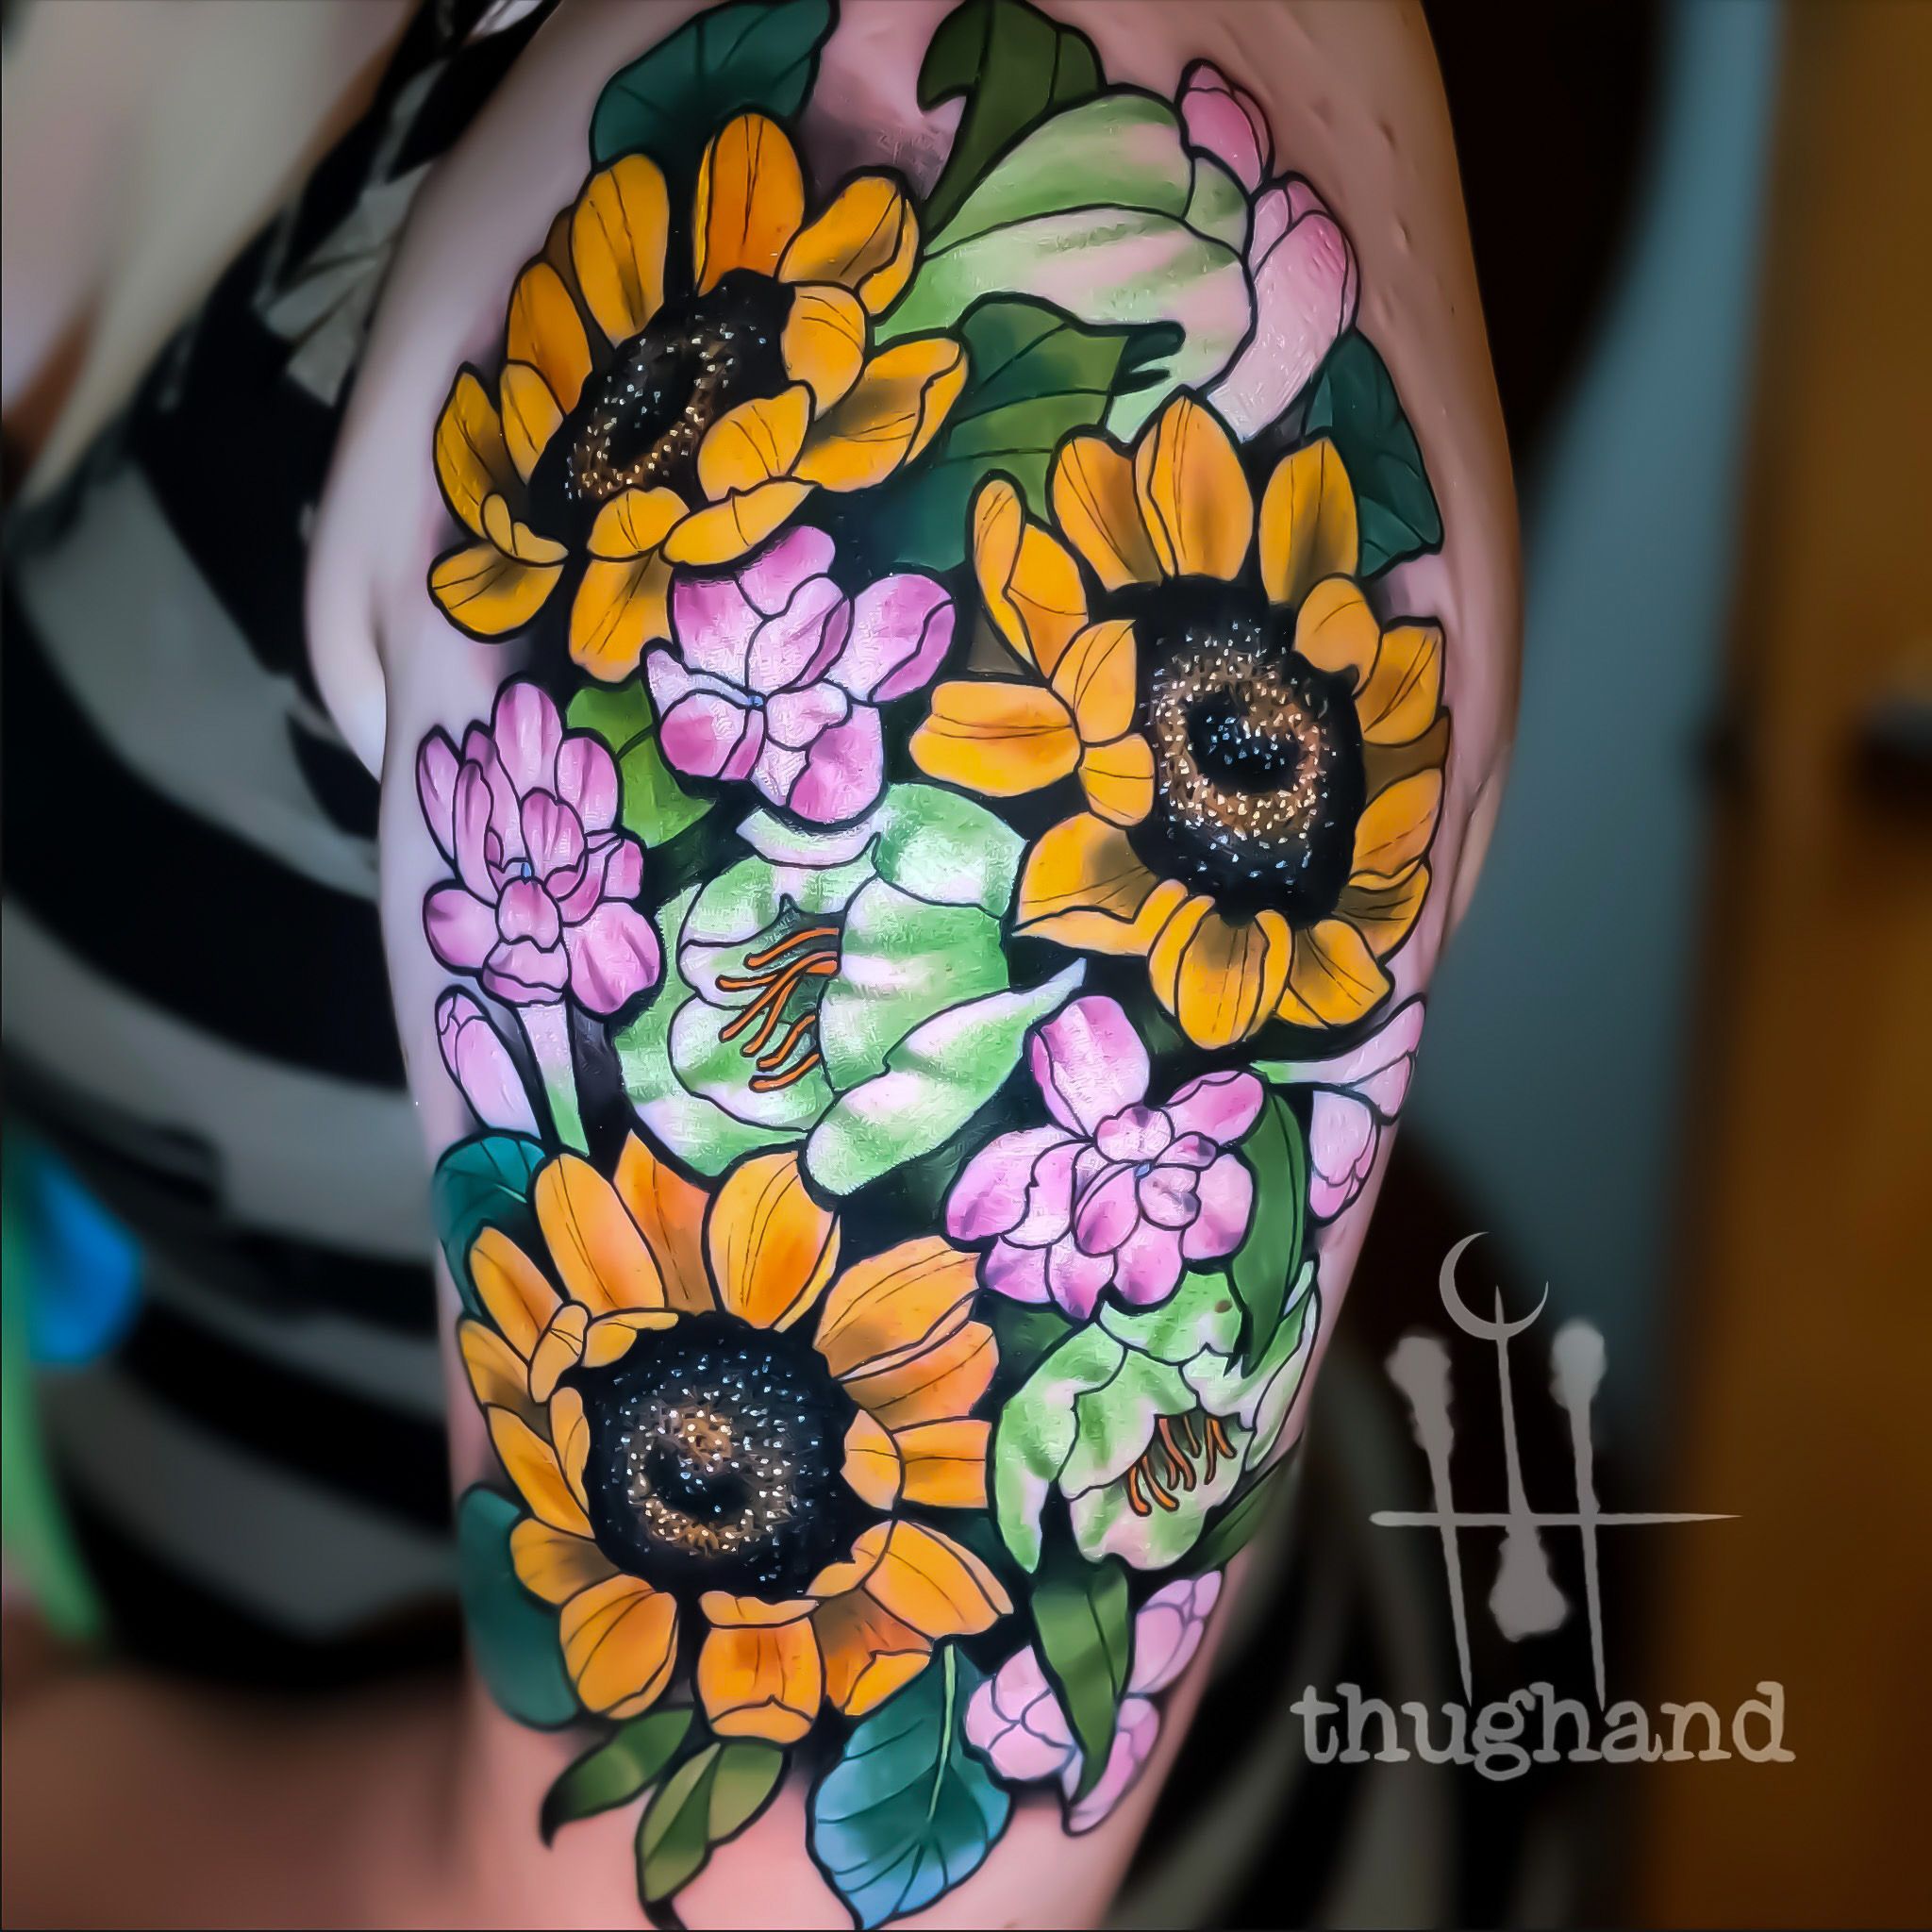 Inspired by her wedding bouquet - Tattoo by Doug Hand #DougHand #illustrative #philly #philadelphia #neotrad #neotraditional